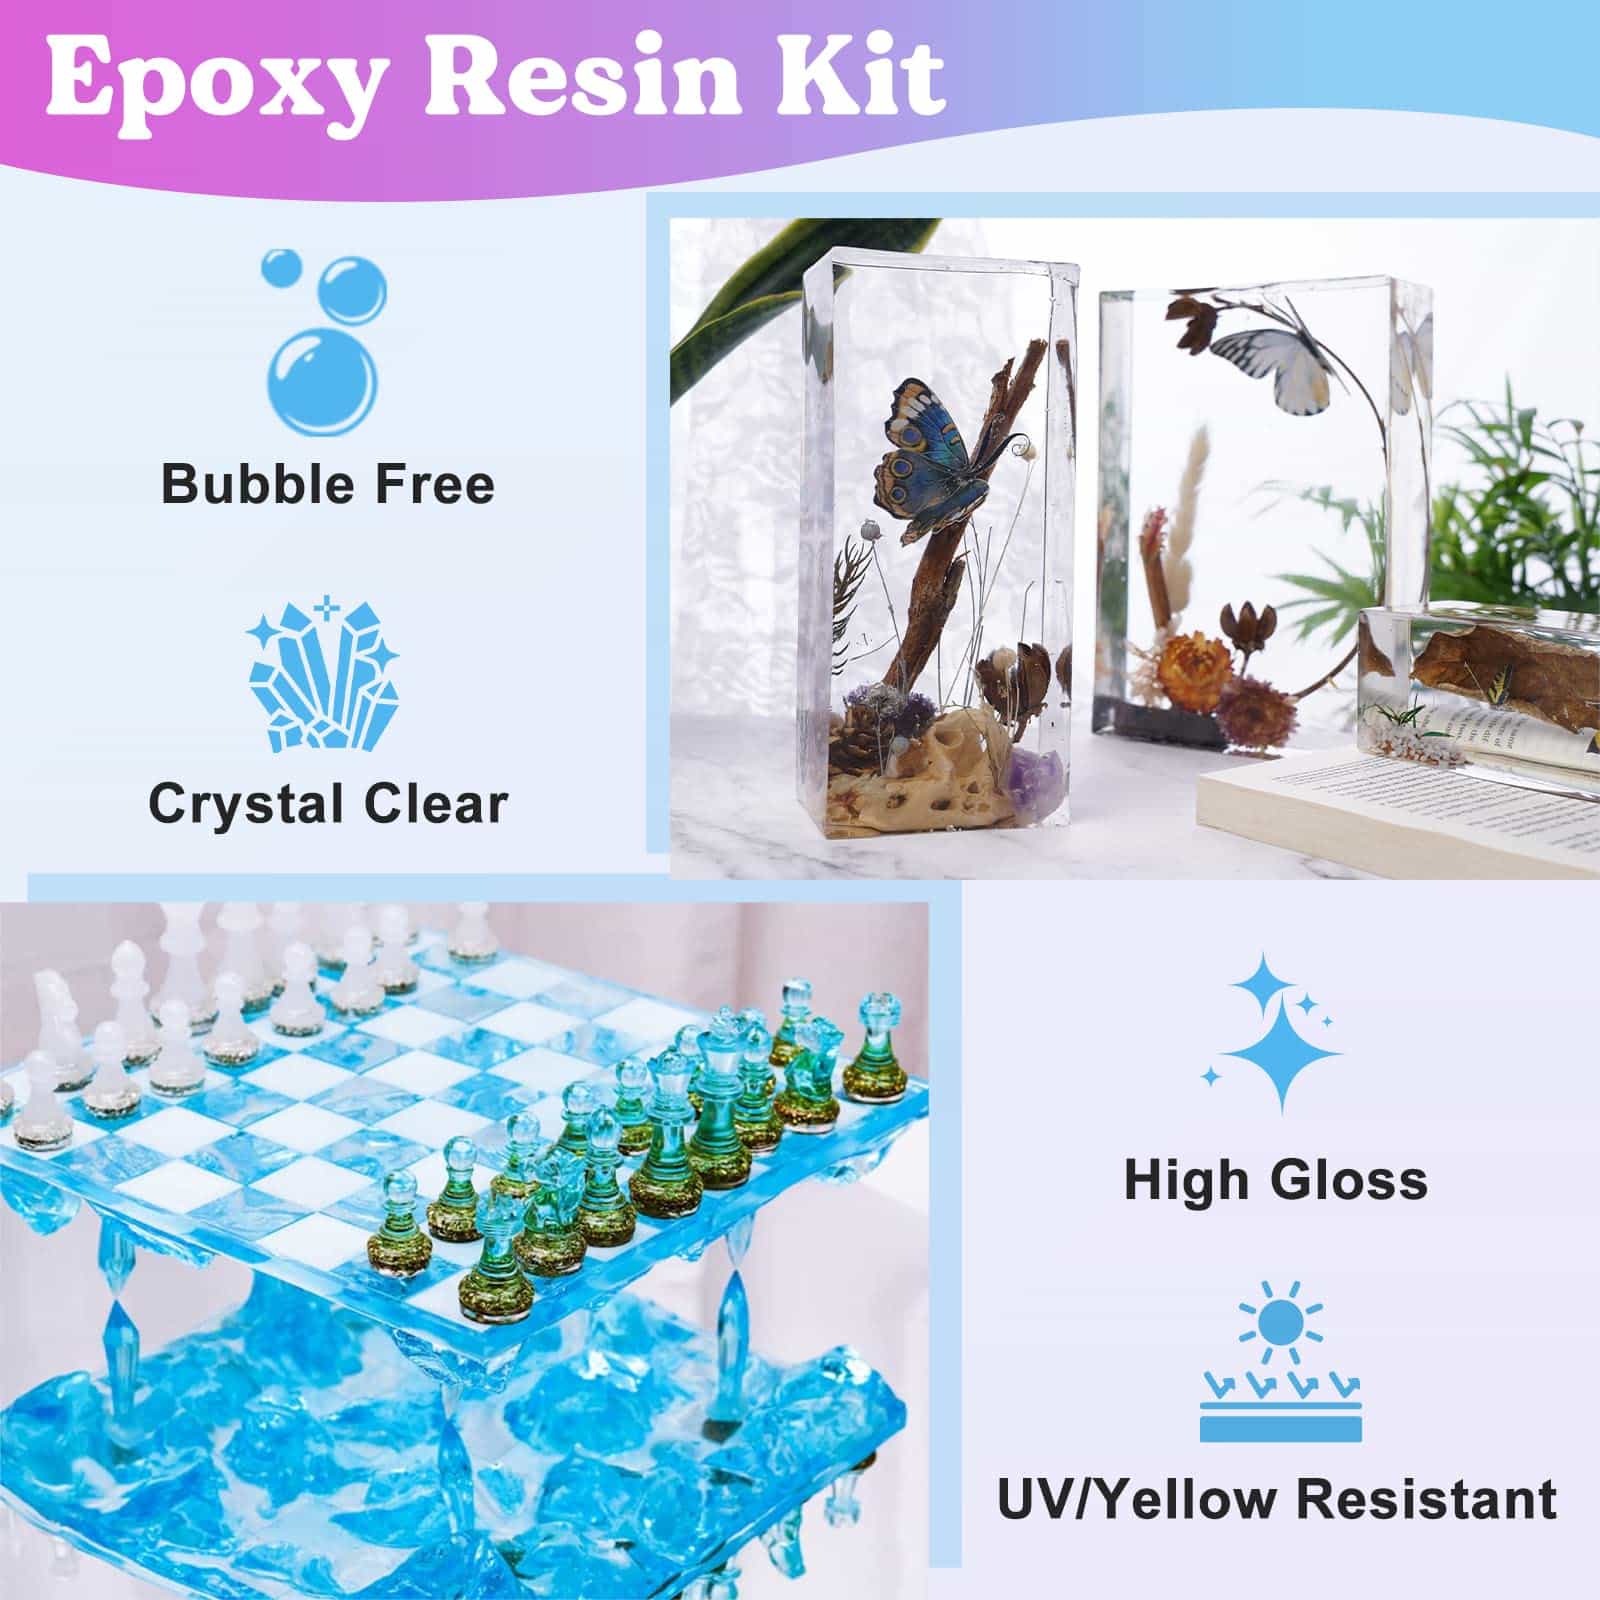 64 oz Epoxy Resin - Super Clear,Bubbles Free,Casting,Table Top – Let's ...